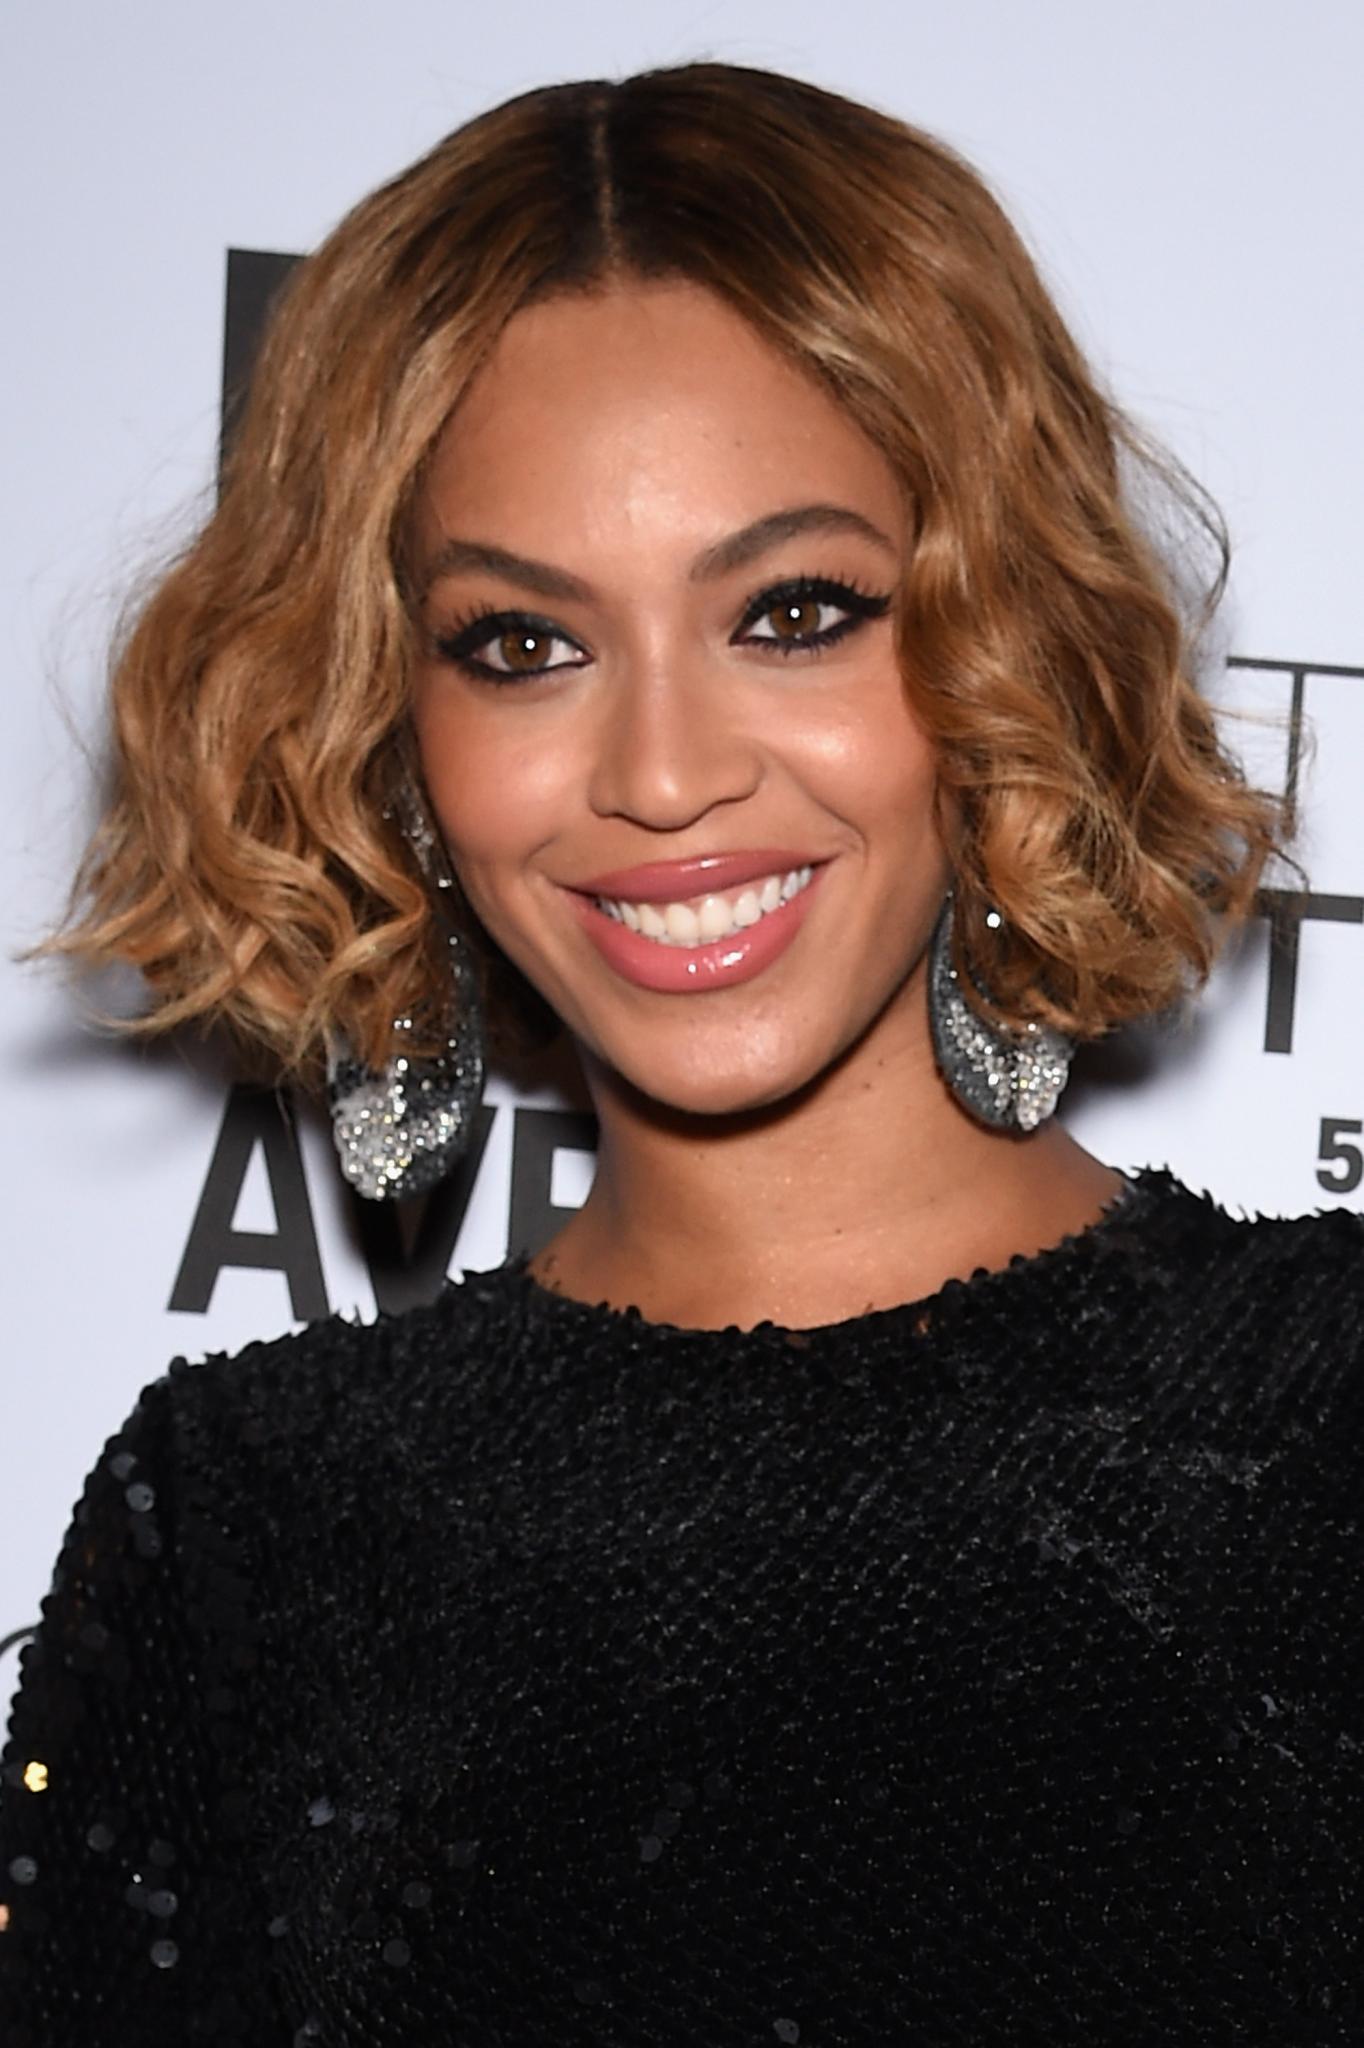 Beyonce Just Became the Most Grammy-Nominated Female